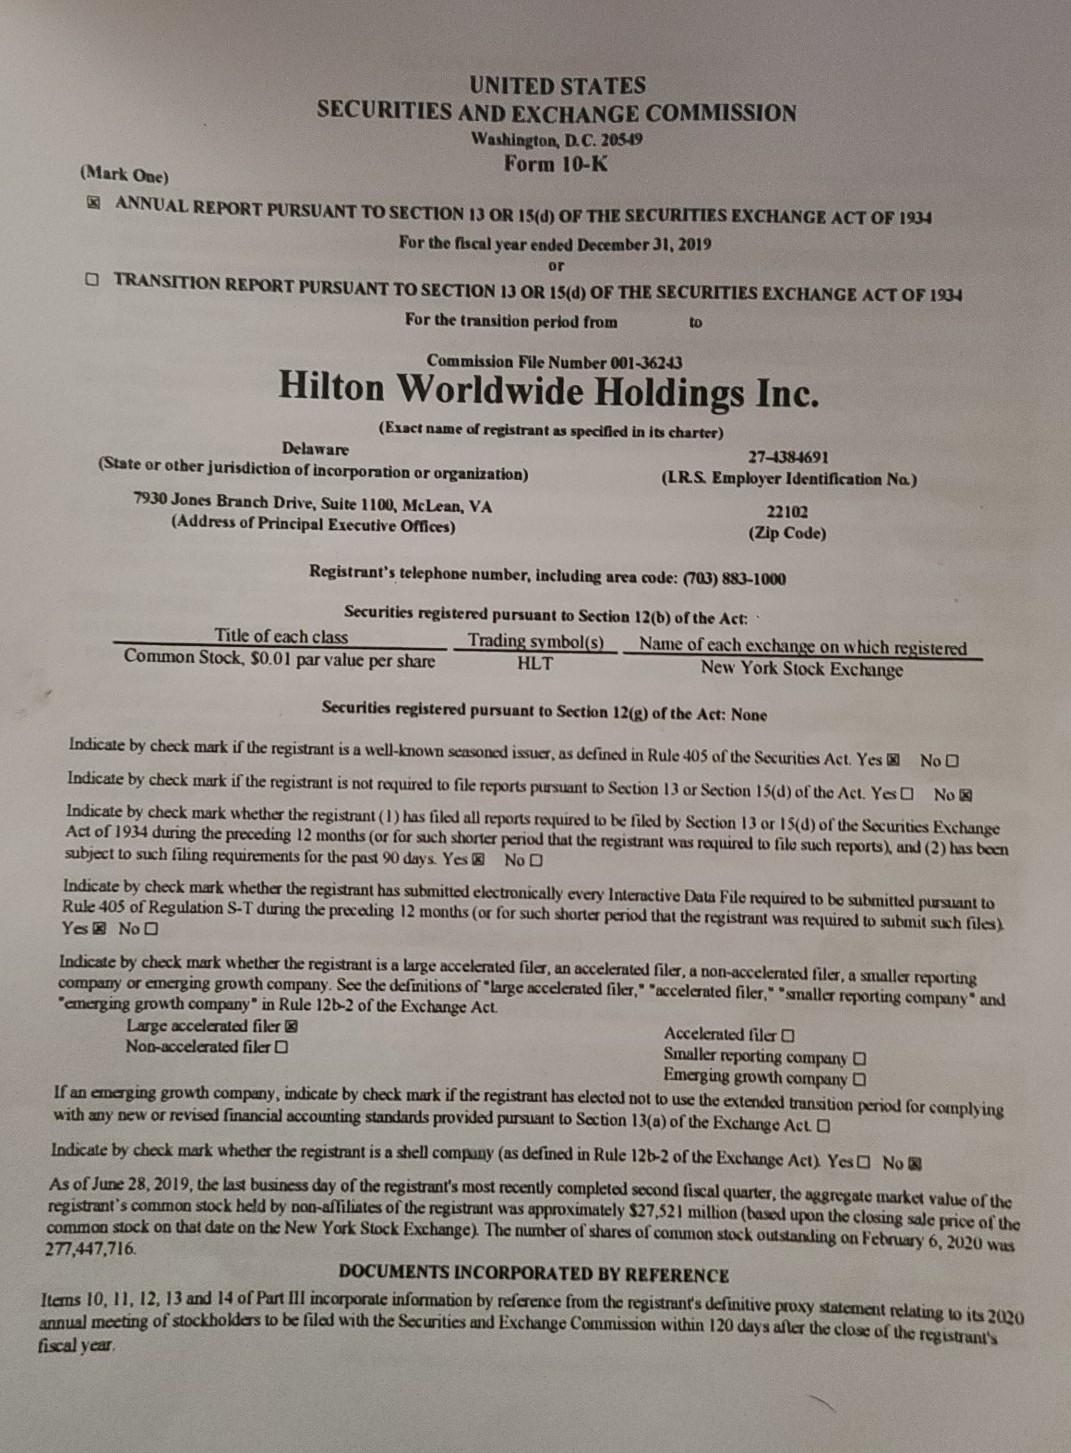 VS MEDIA Holdings Ltd - UNITED STATES SECURITIES AND EXCHANGE COMMISSION  Washington, D.C. 20549 FORM F-1 REGISTRATION STATEMENT THE SECURITIES ACT  OF 1933 VS MEDIA HOLDINGS LIMITED (Exact name of registrant as